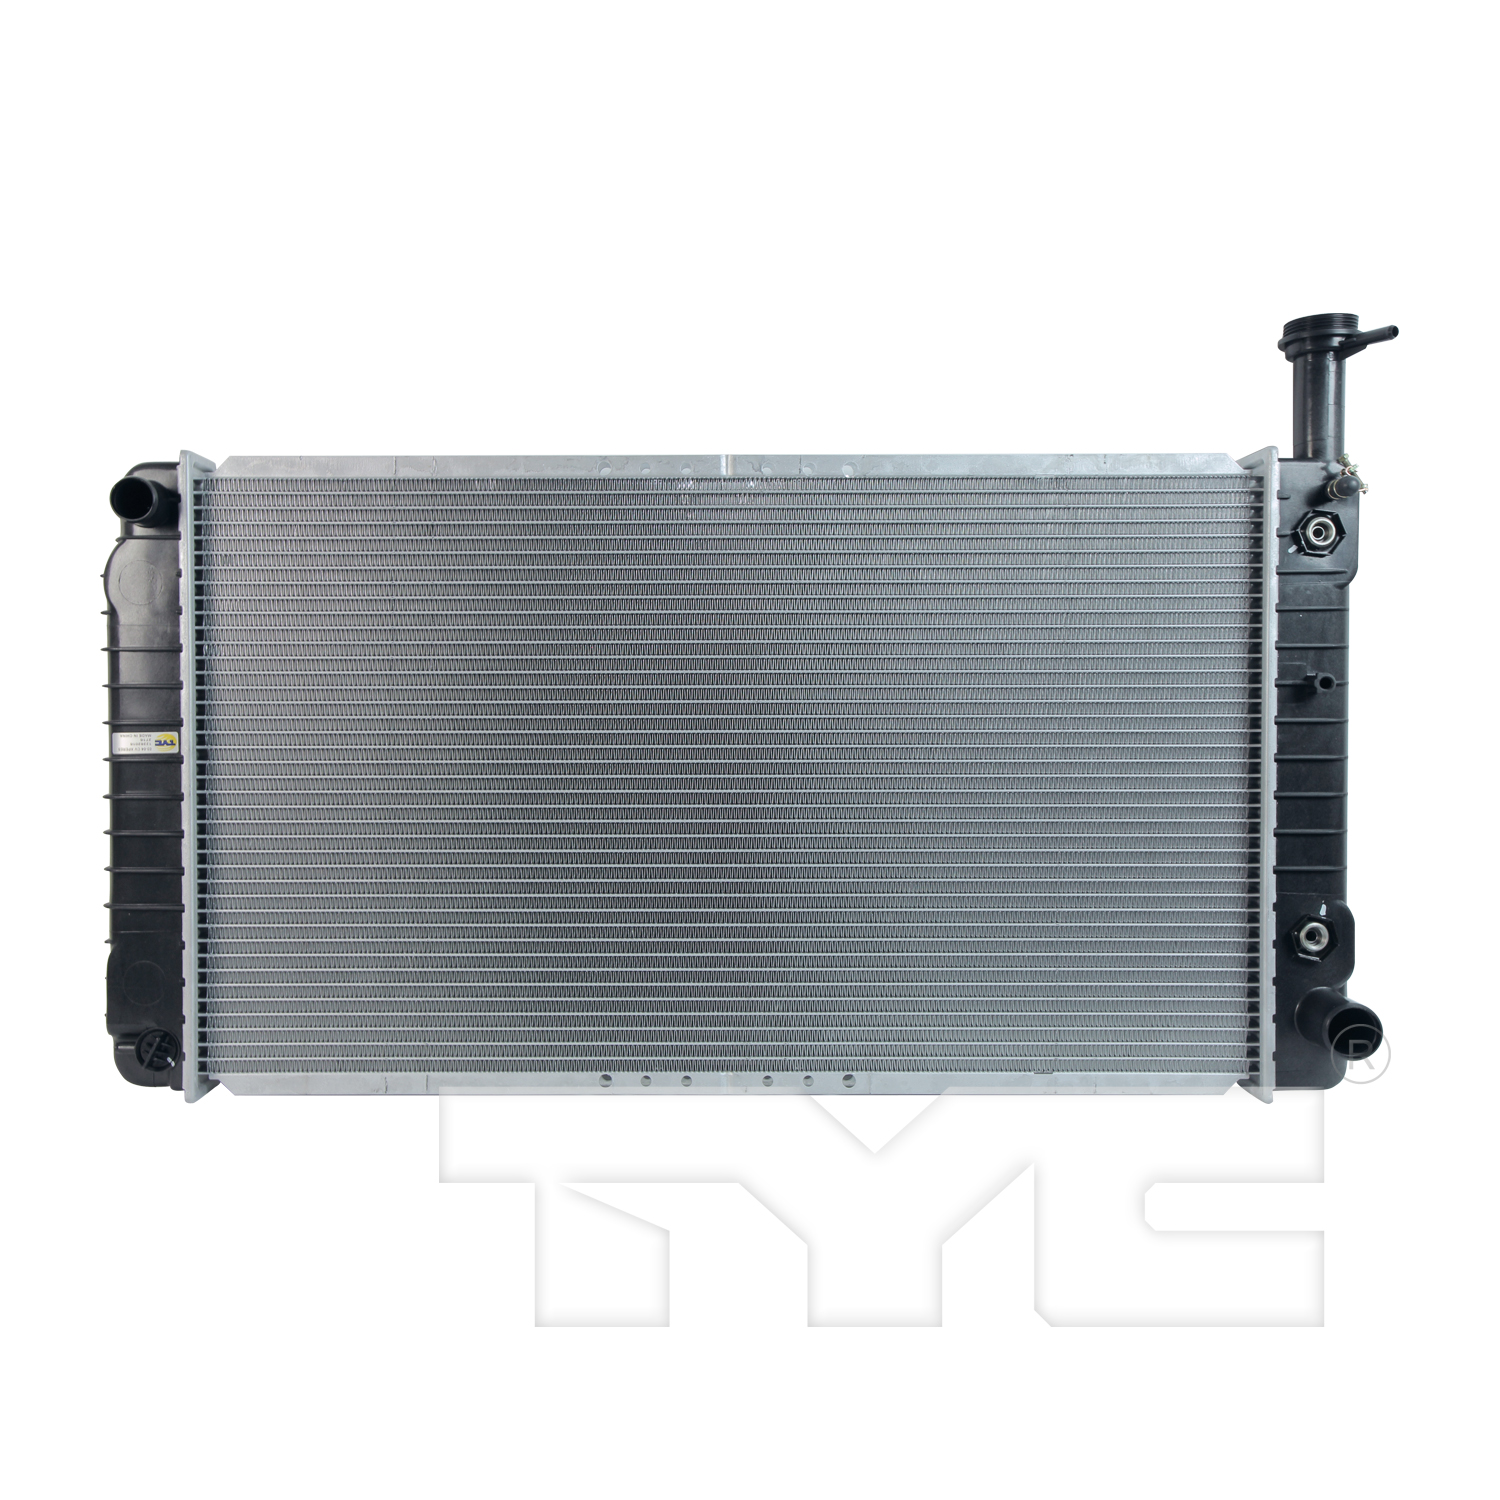 Aftermarket RADIATORS for CHEVROLET - EXPRESS 3500, EXPRESS 3500,03-04,Radiator assembly